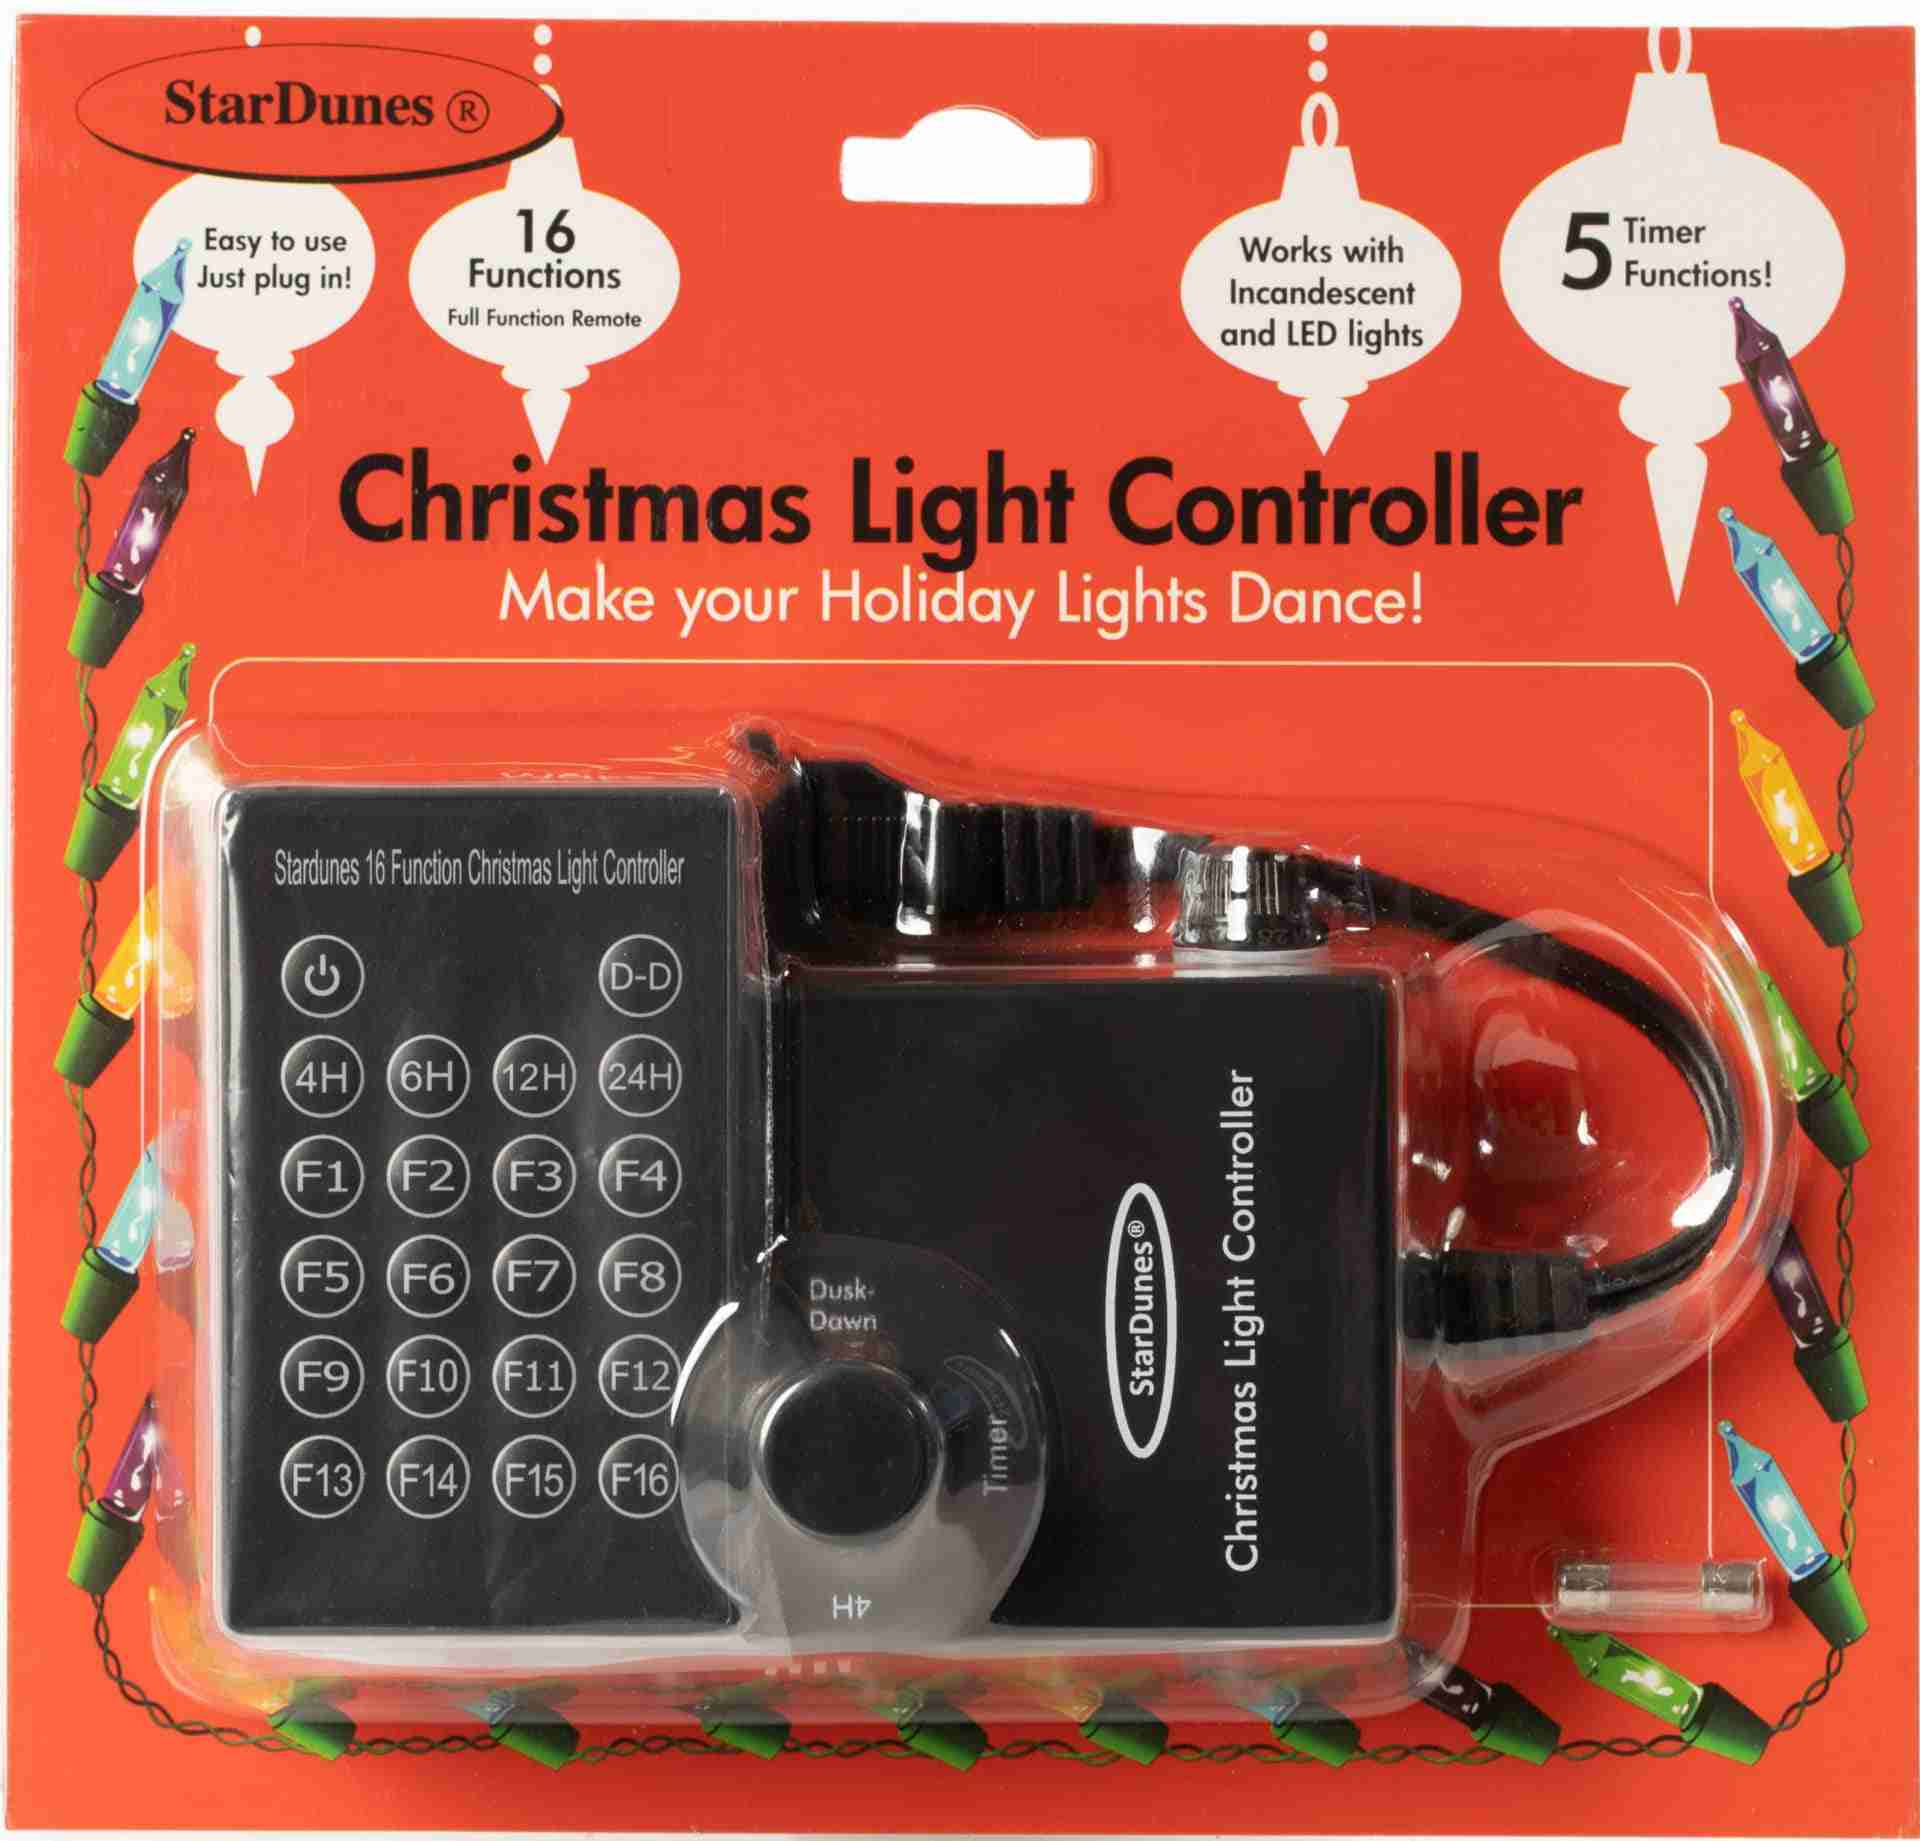 4 Channel Light Controller for Holiday Lights, Christmas Lights, Outdoor  Decorations. Create Dazzling Light Displays with Multiple Functions,  Chasing